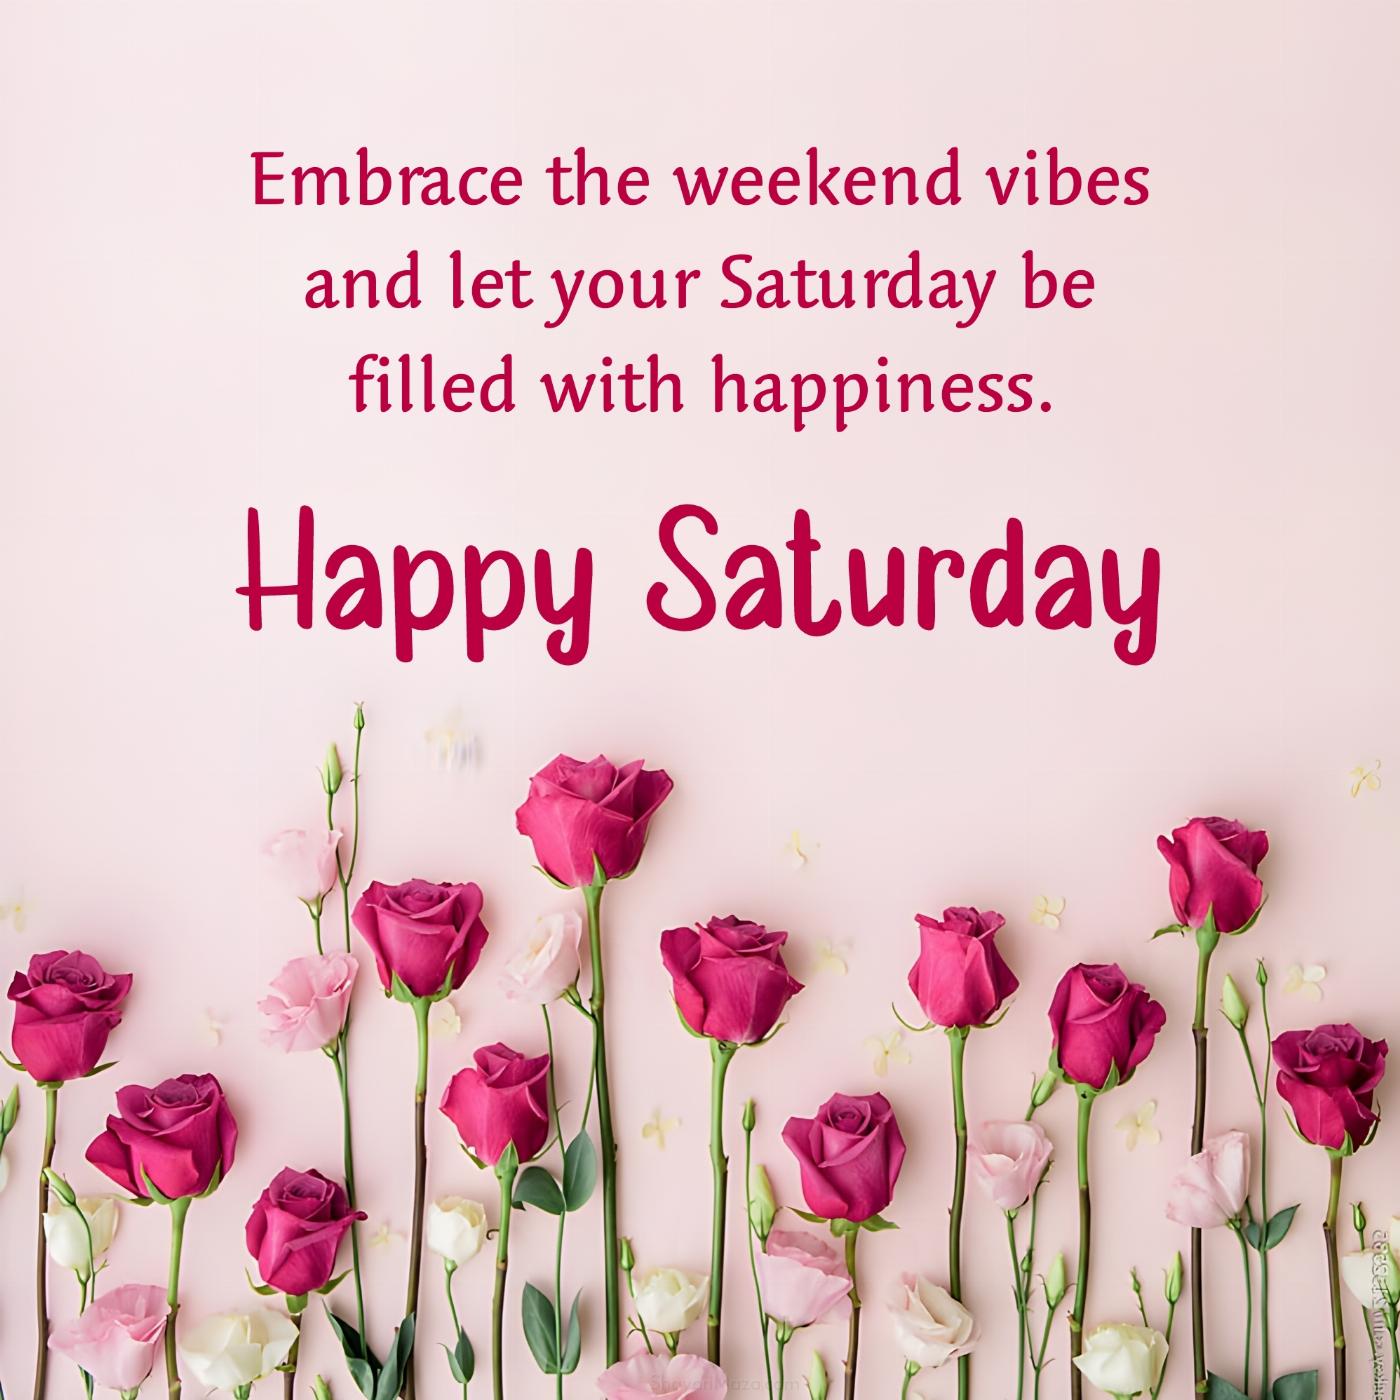 Embrace the weekend vibes and let your Saturday be filled